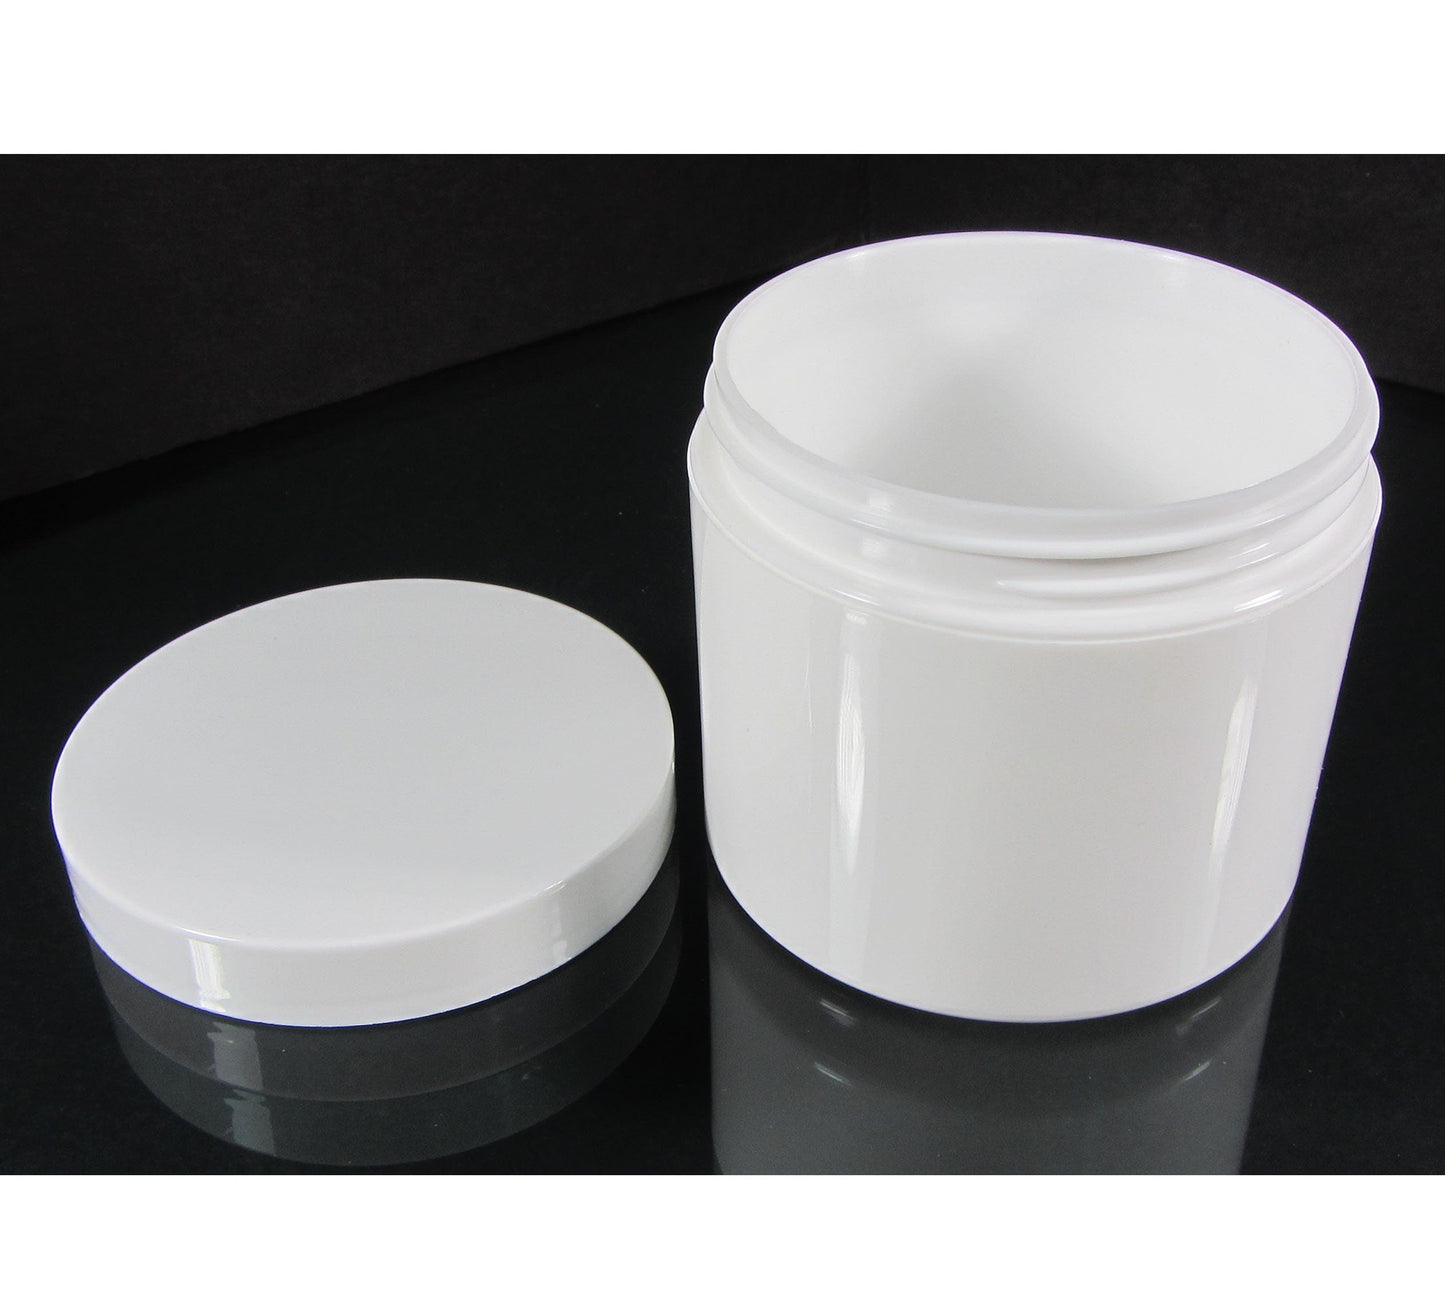 2 Beauty Containers Double Wall White Cosmetic Jars 4 oz. 120 Ml White Lid w/ Pressure Sensitive Liner (9313-2) Discount Cosmetic Jars